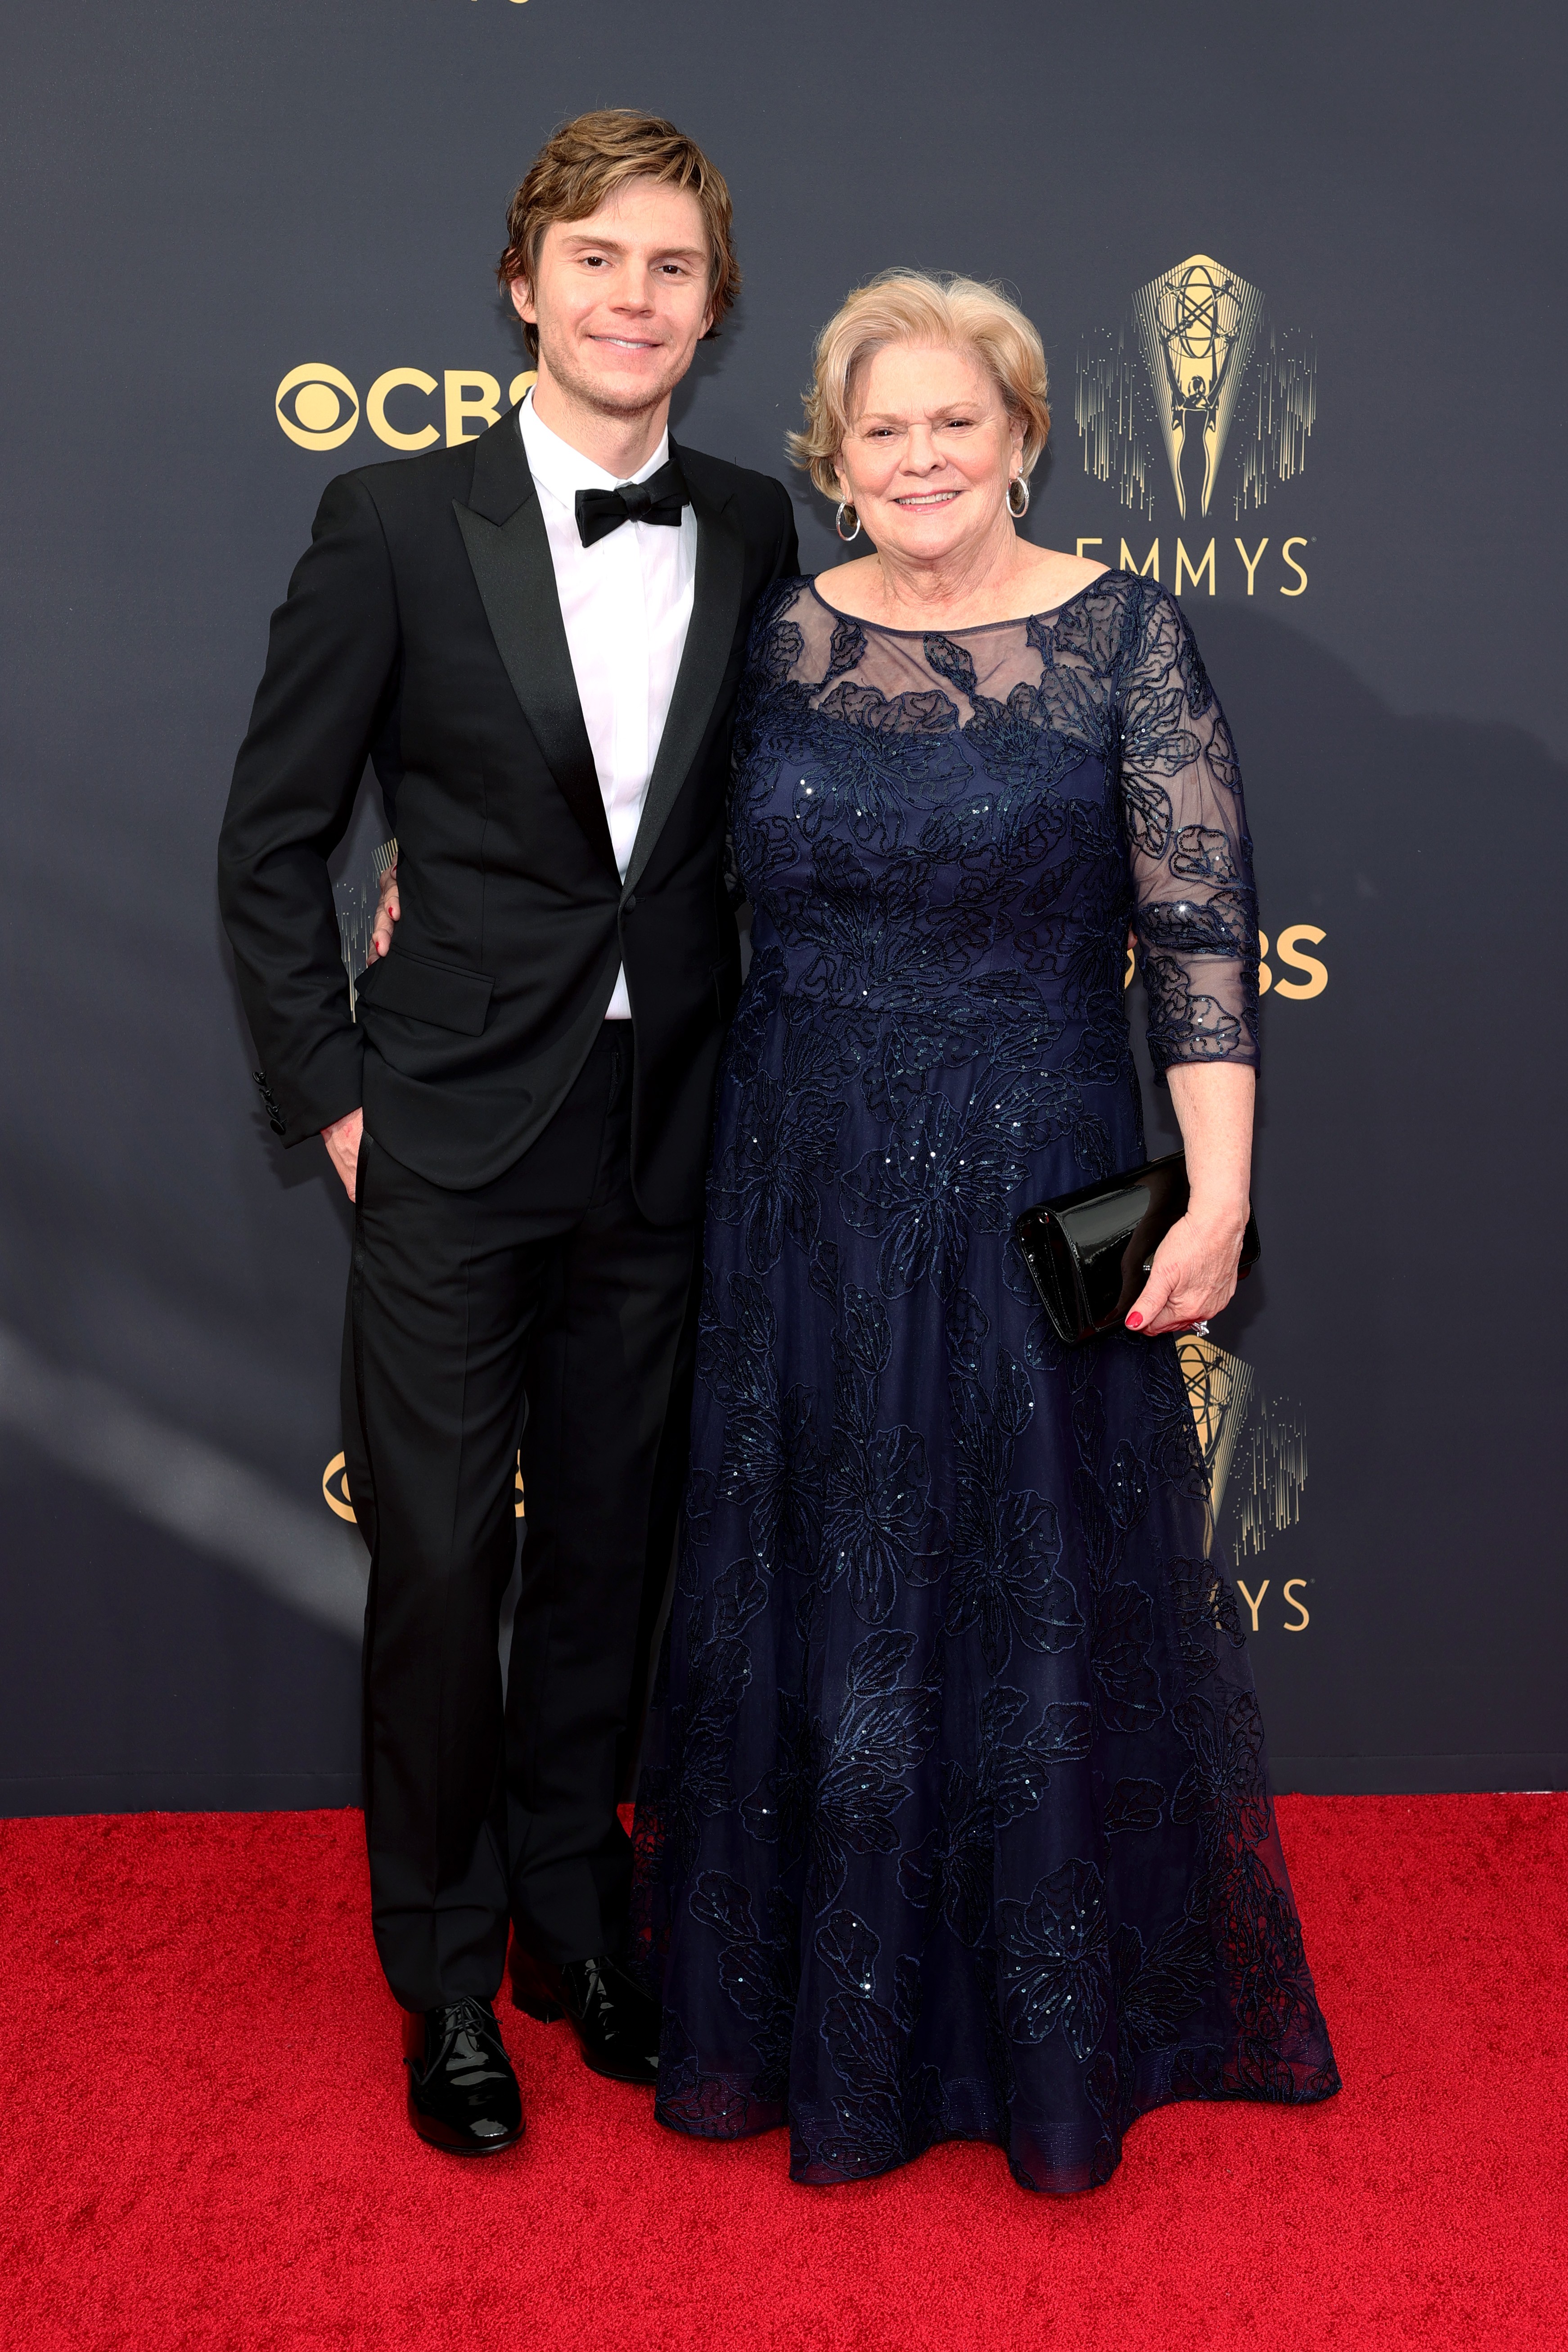 LOS ANGELES, CALIFORNIA - SEPTEMBER 19: (L-R) Evan Peters and Julie Peters attend the 73rd Primetime Emmy Awards at L.A. LIVE on September 19, 2021 in Los Angeles, California. (Photo by Rich Fury/Getty Images) (Foto: Getty Images)